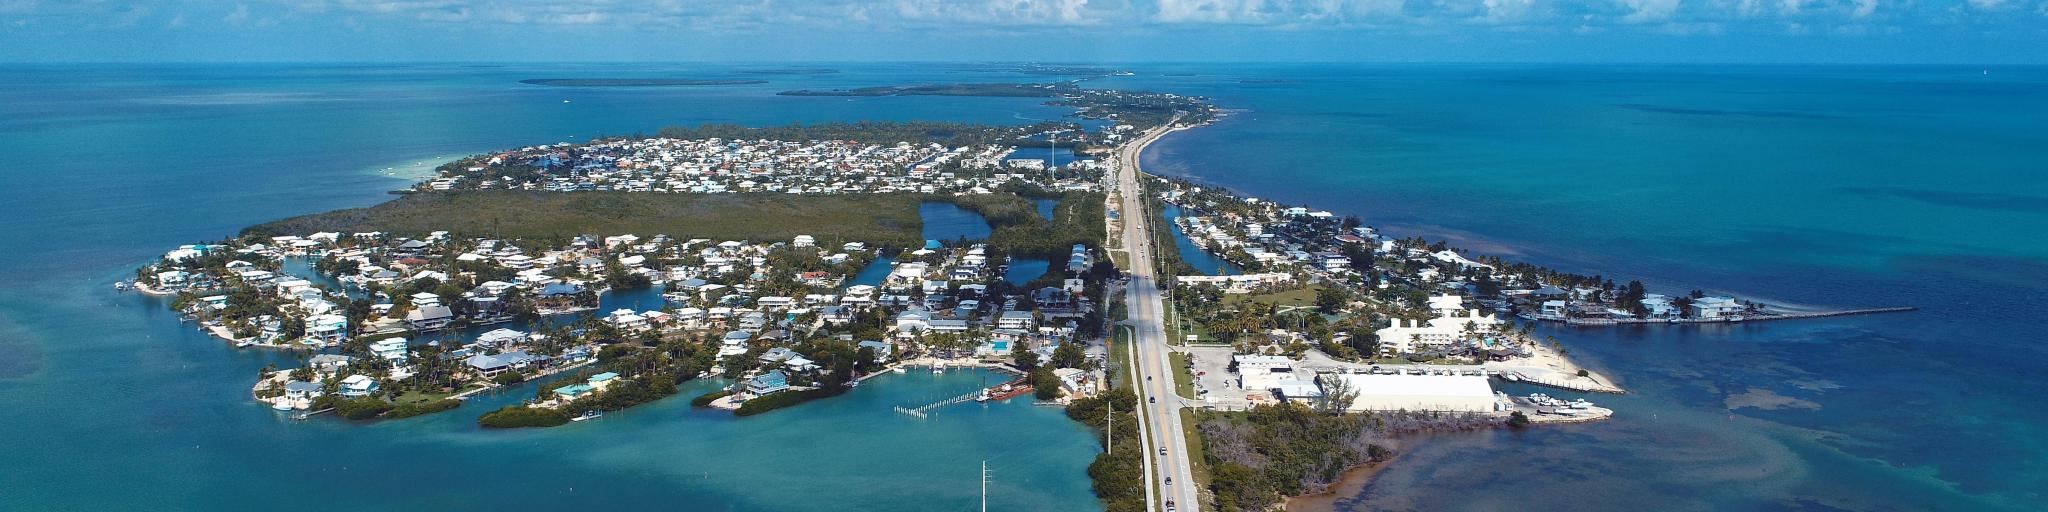 Aerial view of famous bridge and islands in the way to Key West, Florida Keys, United States